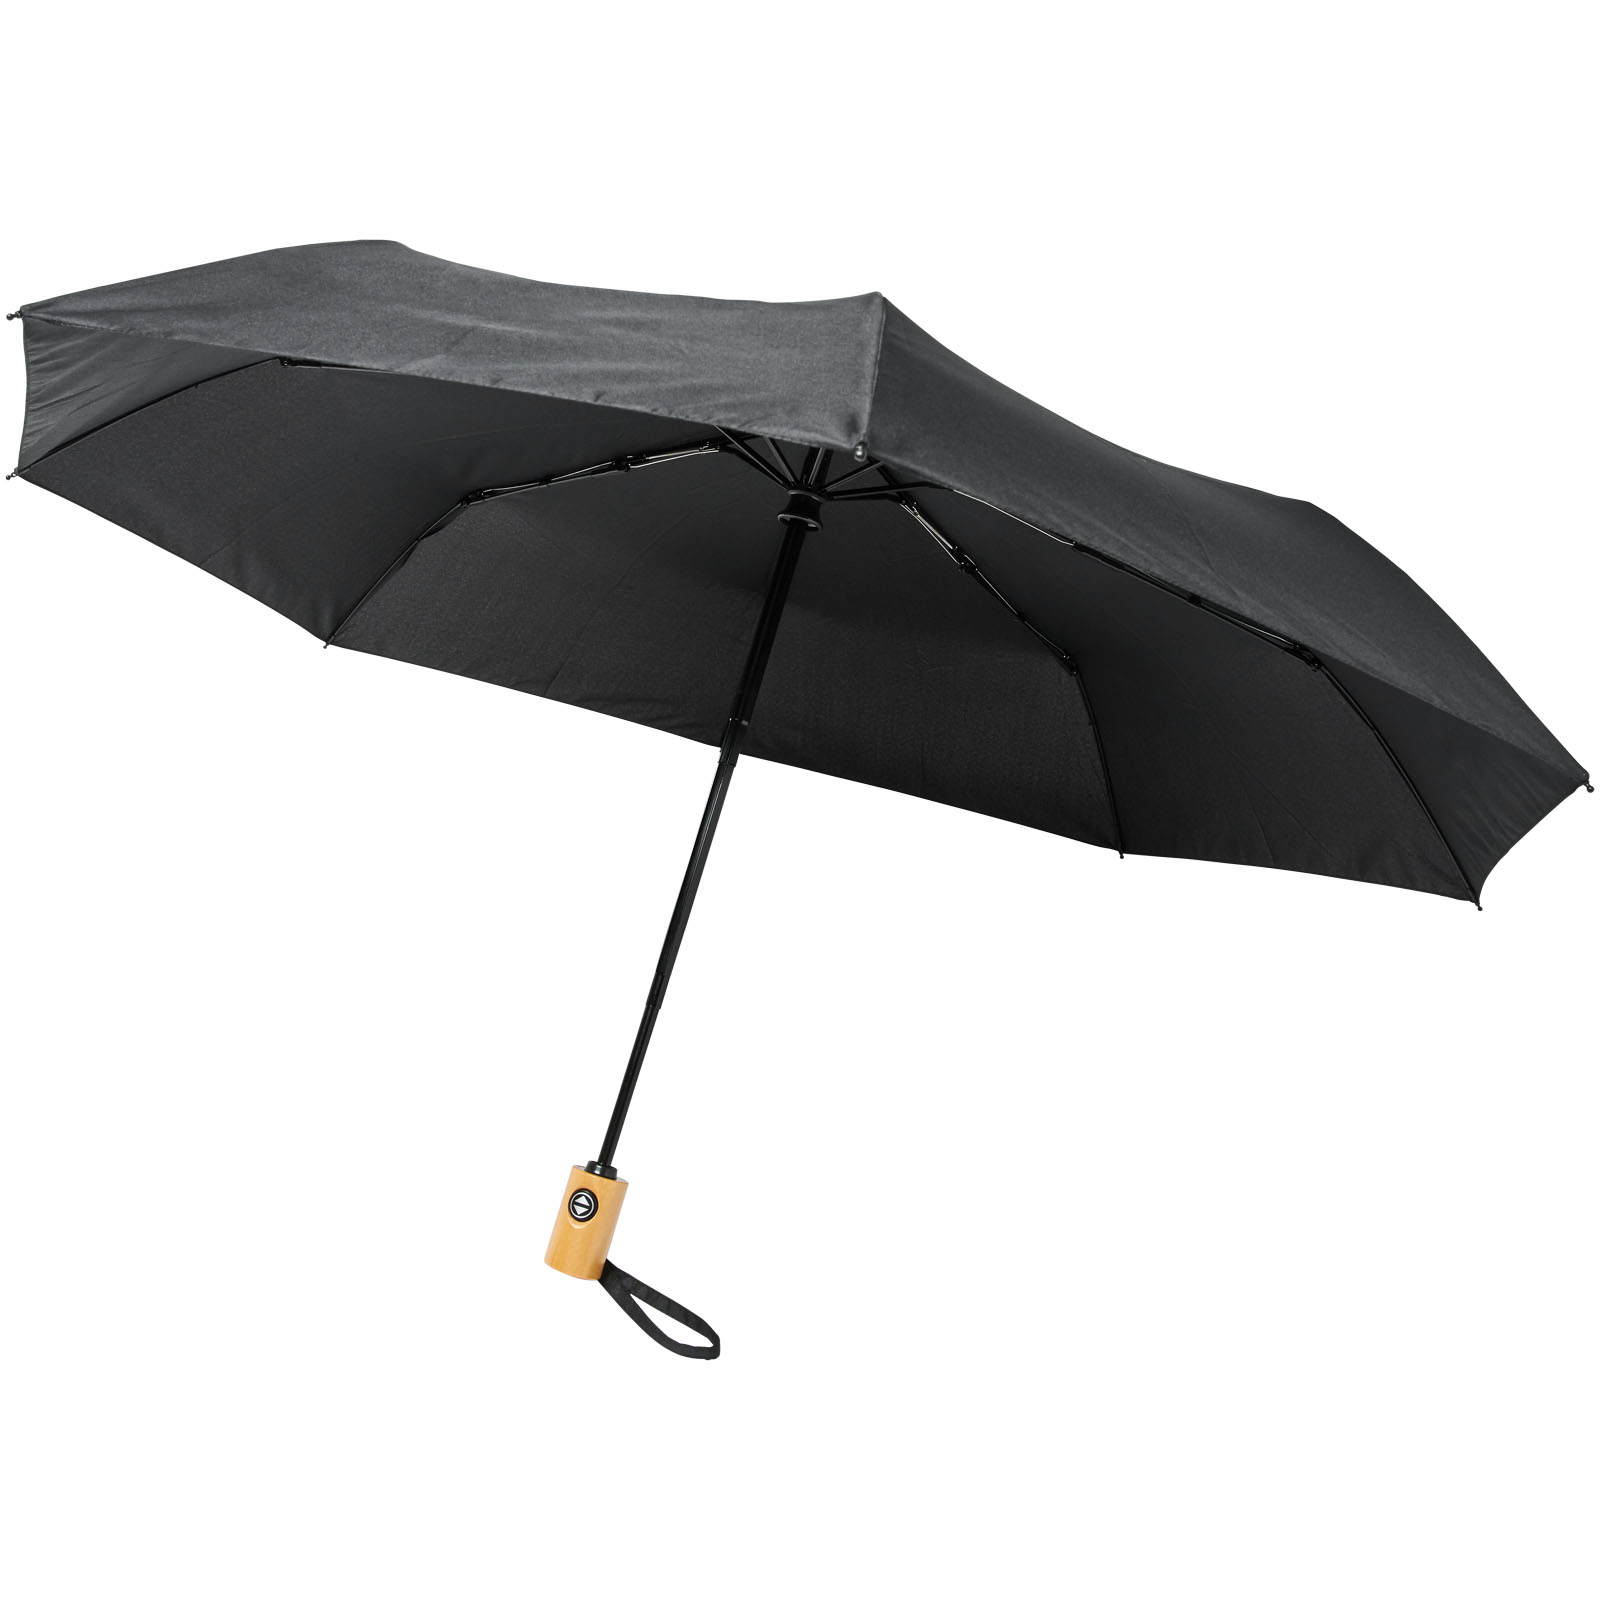 An automatic folding umbrella that opens and closes with a canopy made from recycled PET Pongee Polyester. - Sandhurst